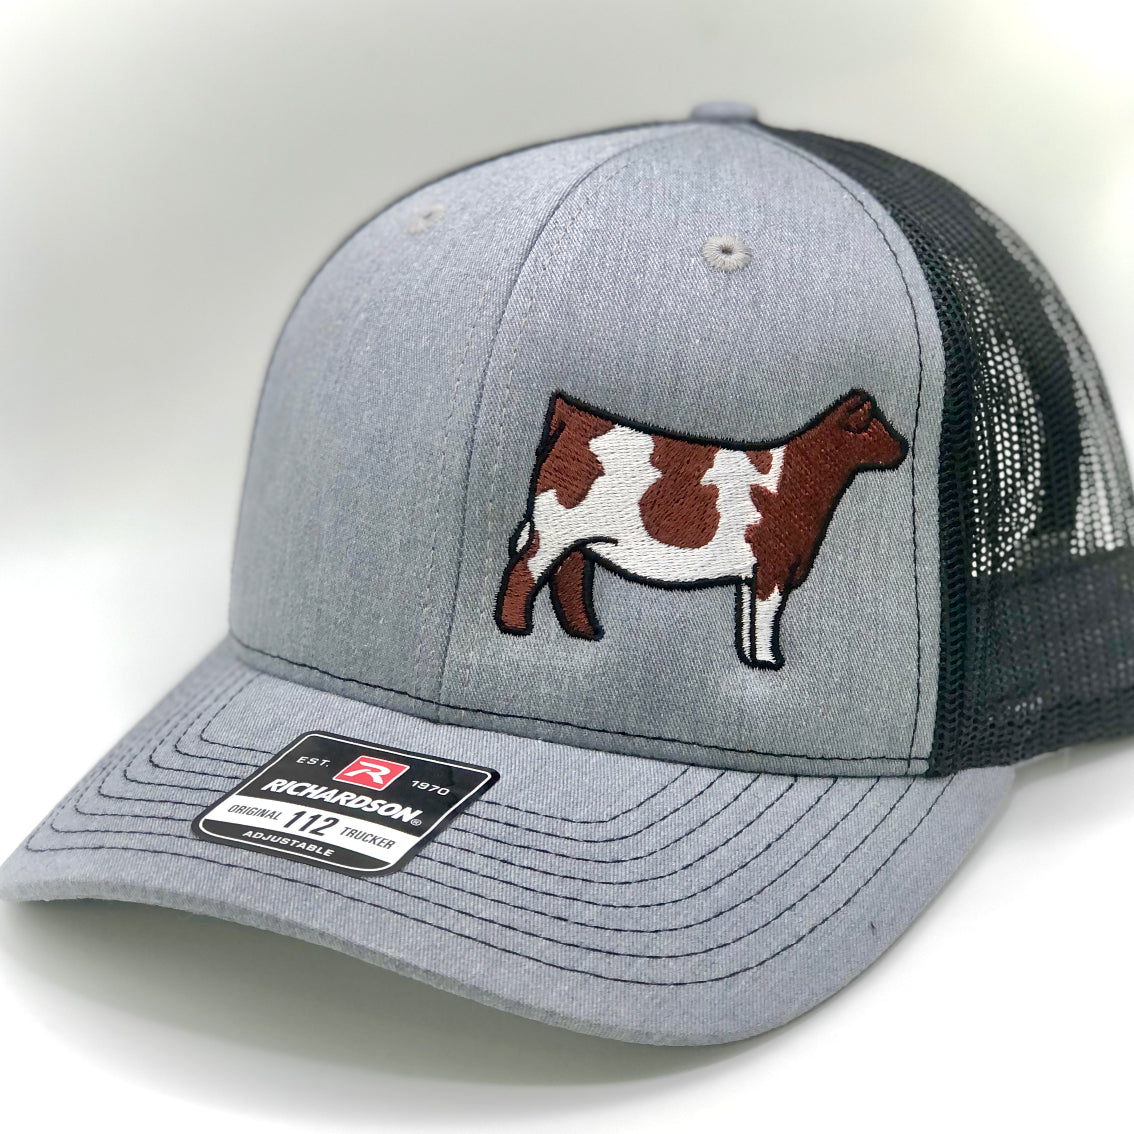 Shorthorn Cattle Embroidered Hat